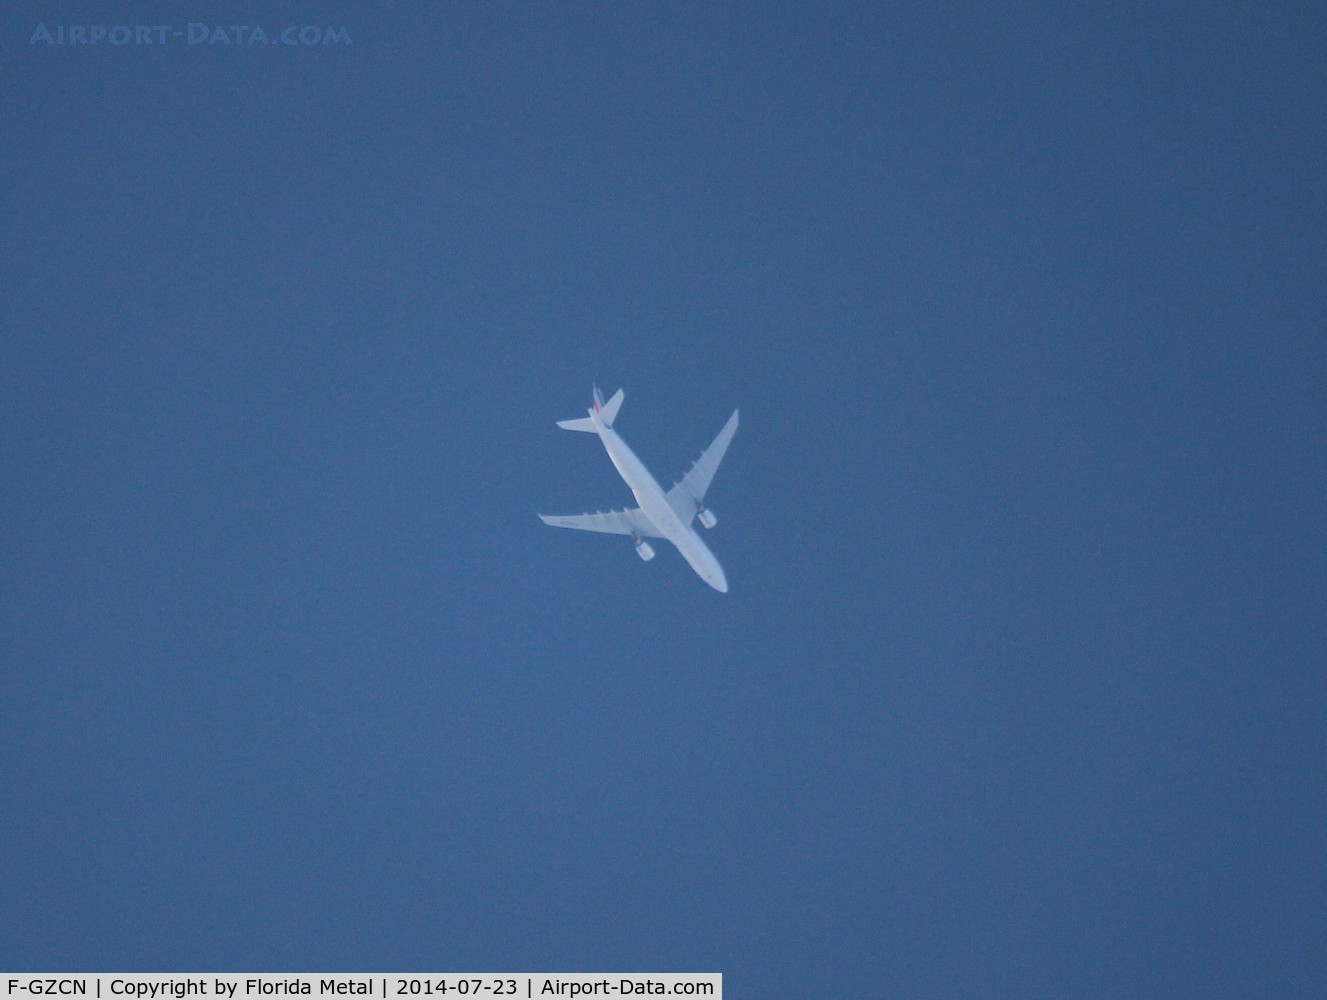 F-GZCN, 2004 Airbus A330-203 C/N 584, Air France A330-200 over Livonia Michigan at 34,000 ft flying ORD-CDG info from flightradar24